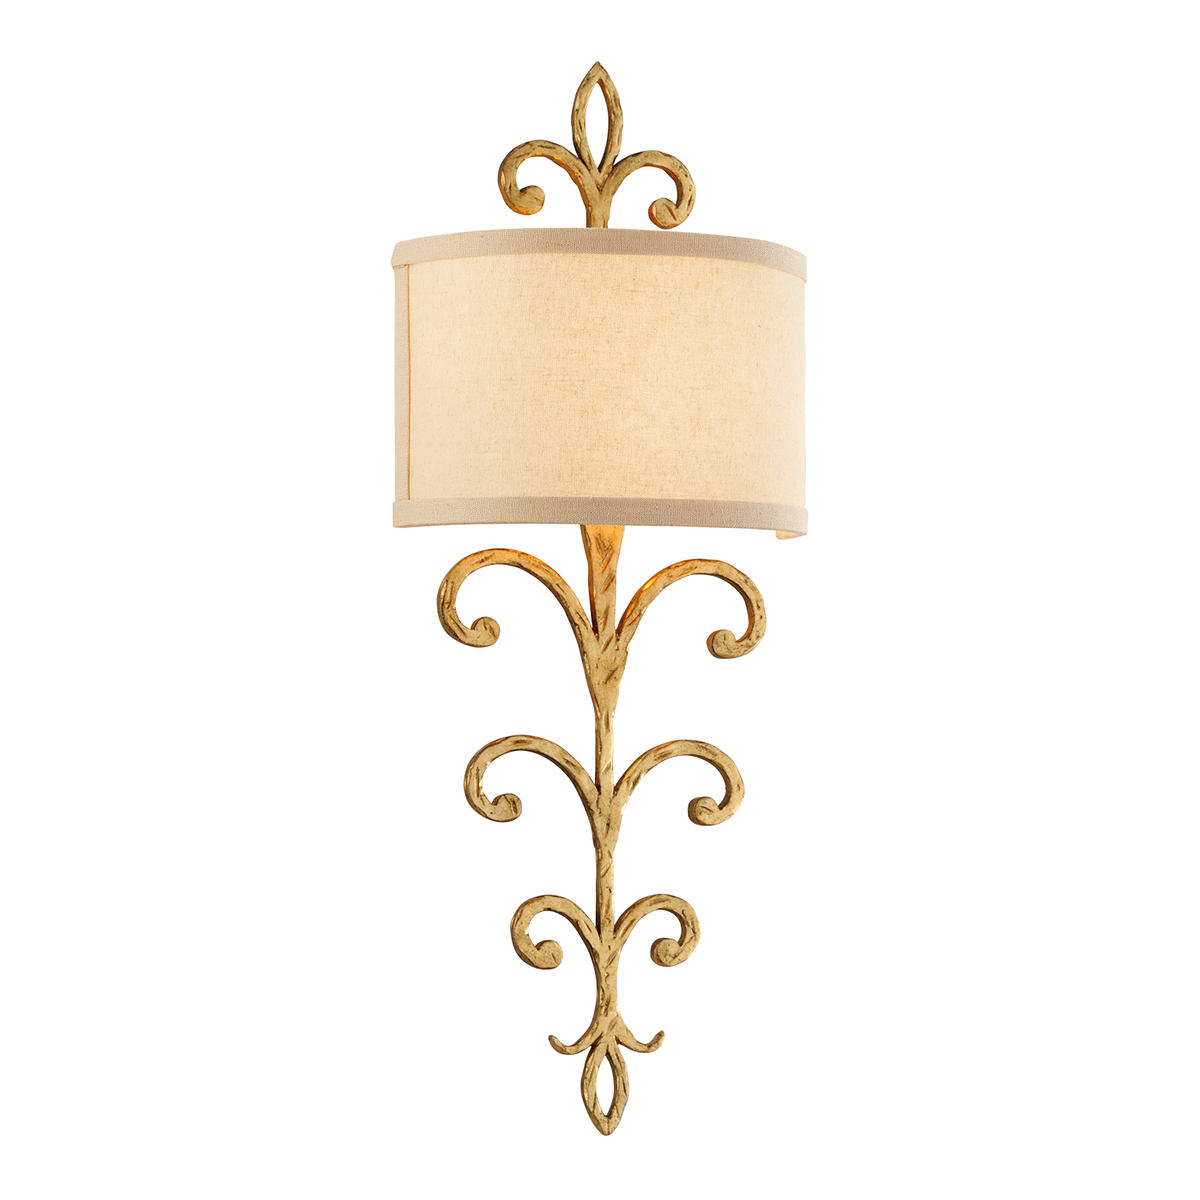 Troy Lighting Crawford Wall Sconce Wall Sconce Troy Lighting CRAWFORD GOLD 11x11x25.75 